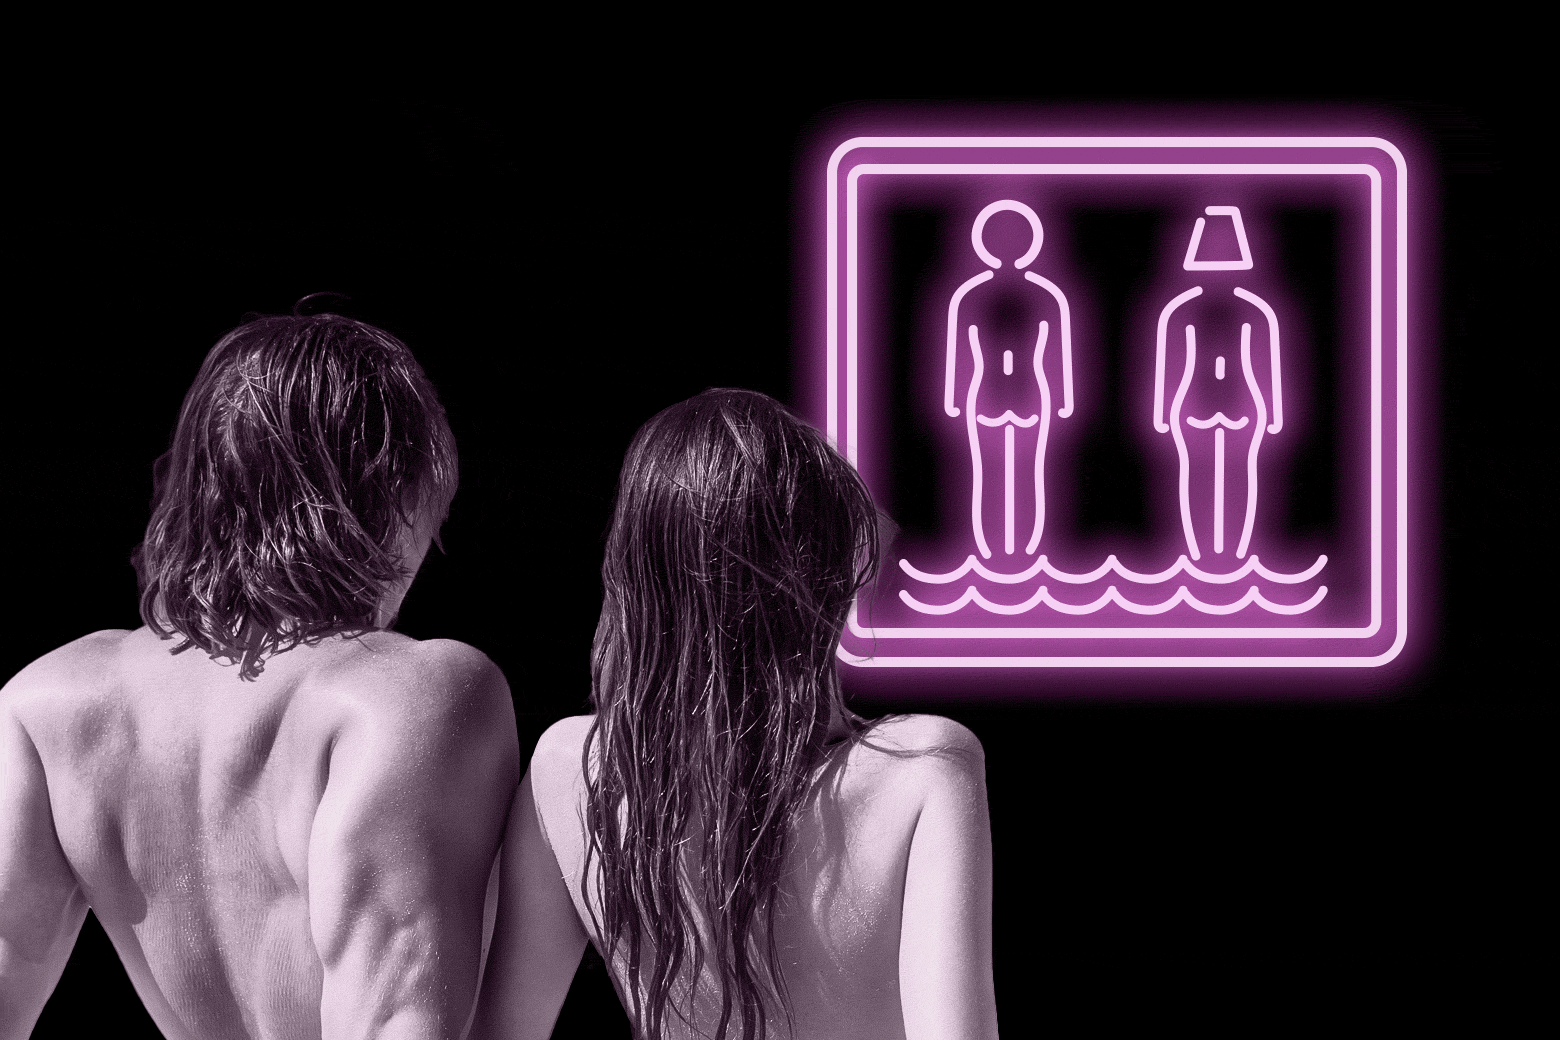 A straight couple looks at an illustrated sign for a nudist beach.